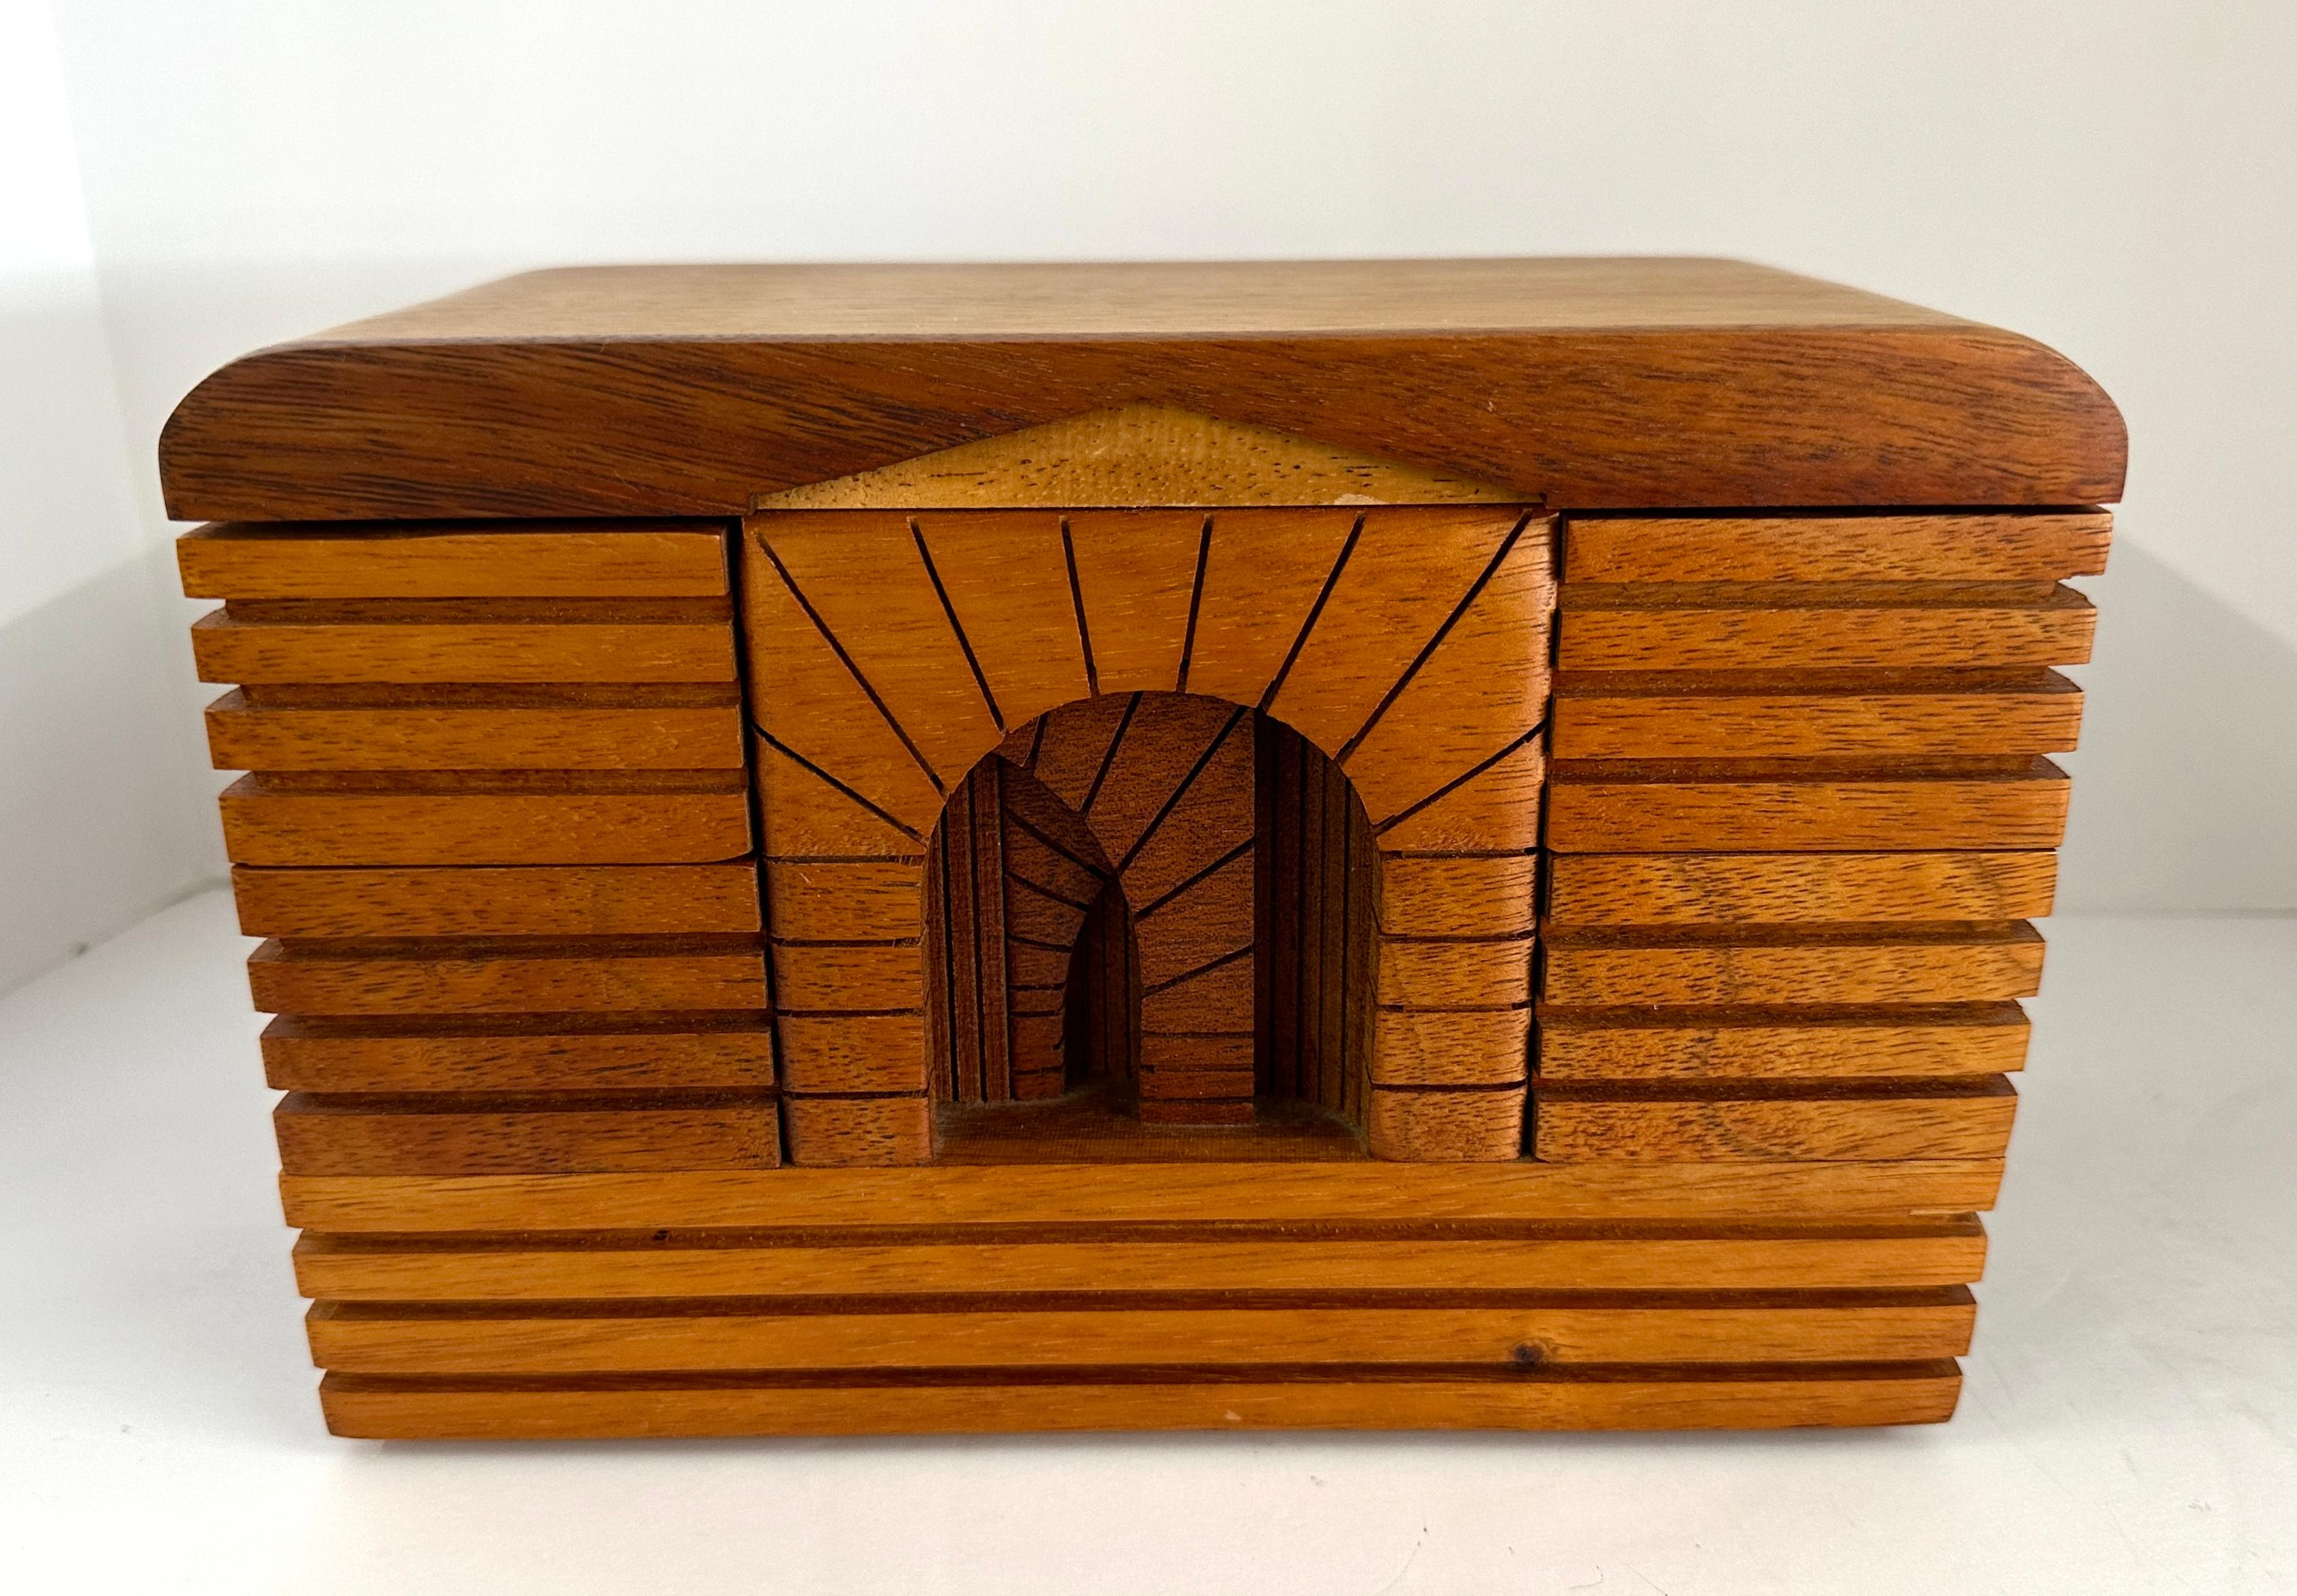 Wonderful architectural box by the talented British born California artist Po Shun Leong. Signed on the base and dated 87, it is made of Koa and Mahogany. In good vintage age appropriate condition with some minor flaws which are pictured in the